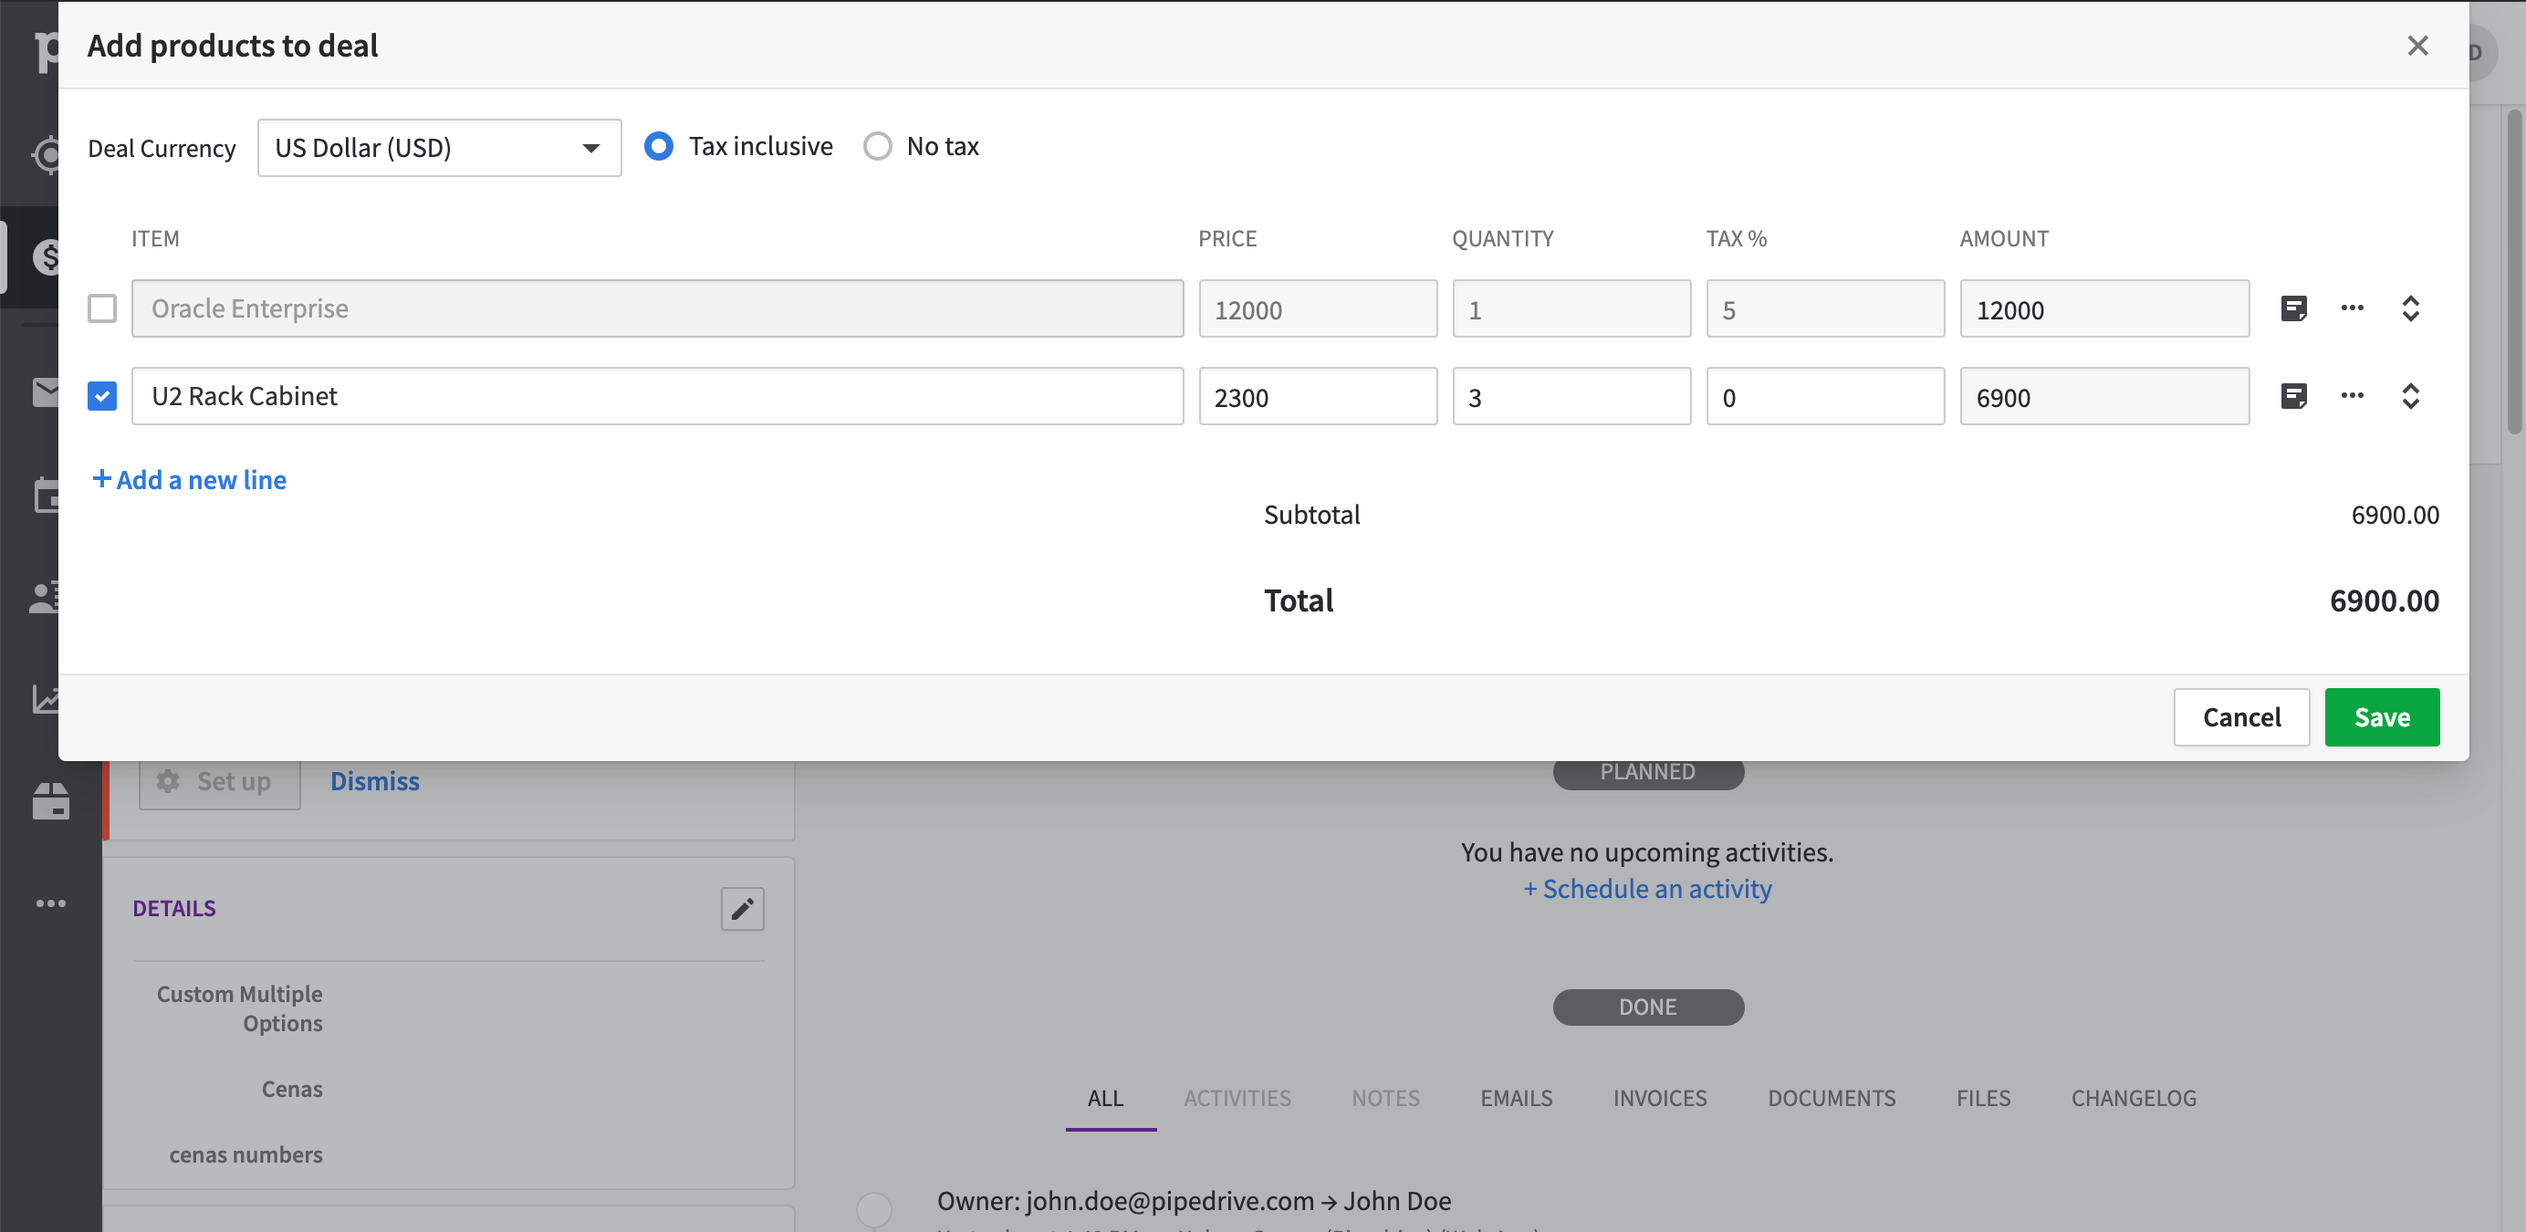 Using a Deal’s products to select what to invoice